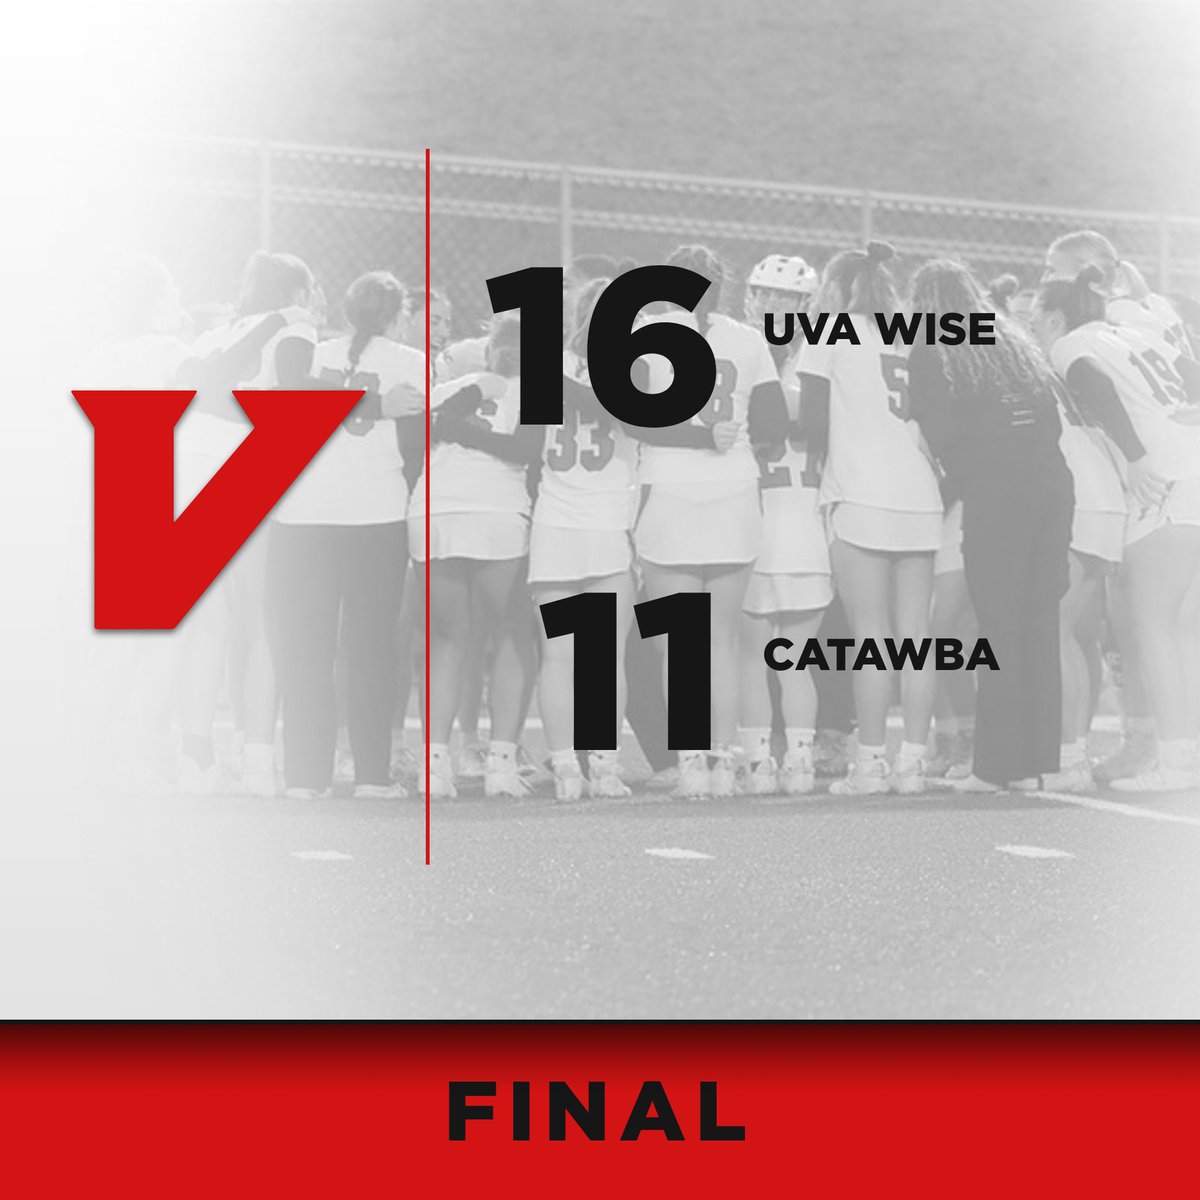 @UVA_Wise_Lax is headed home with the Win! 
#GoCavsGo